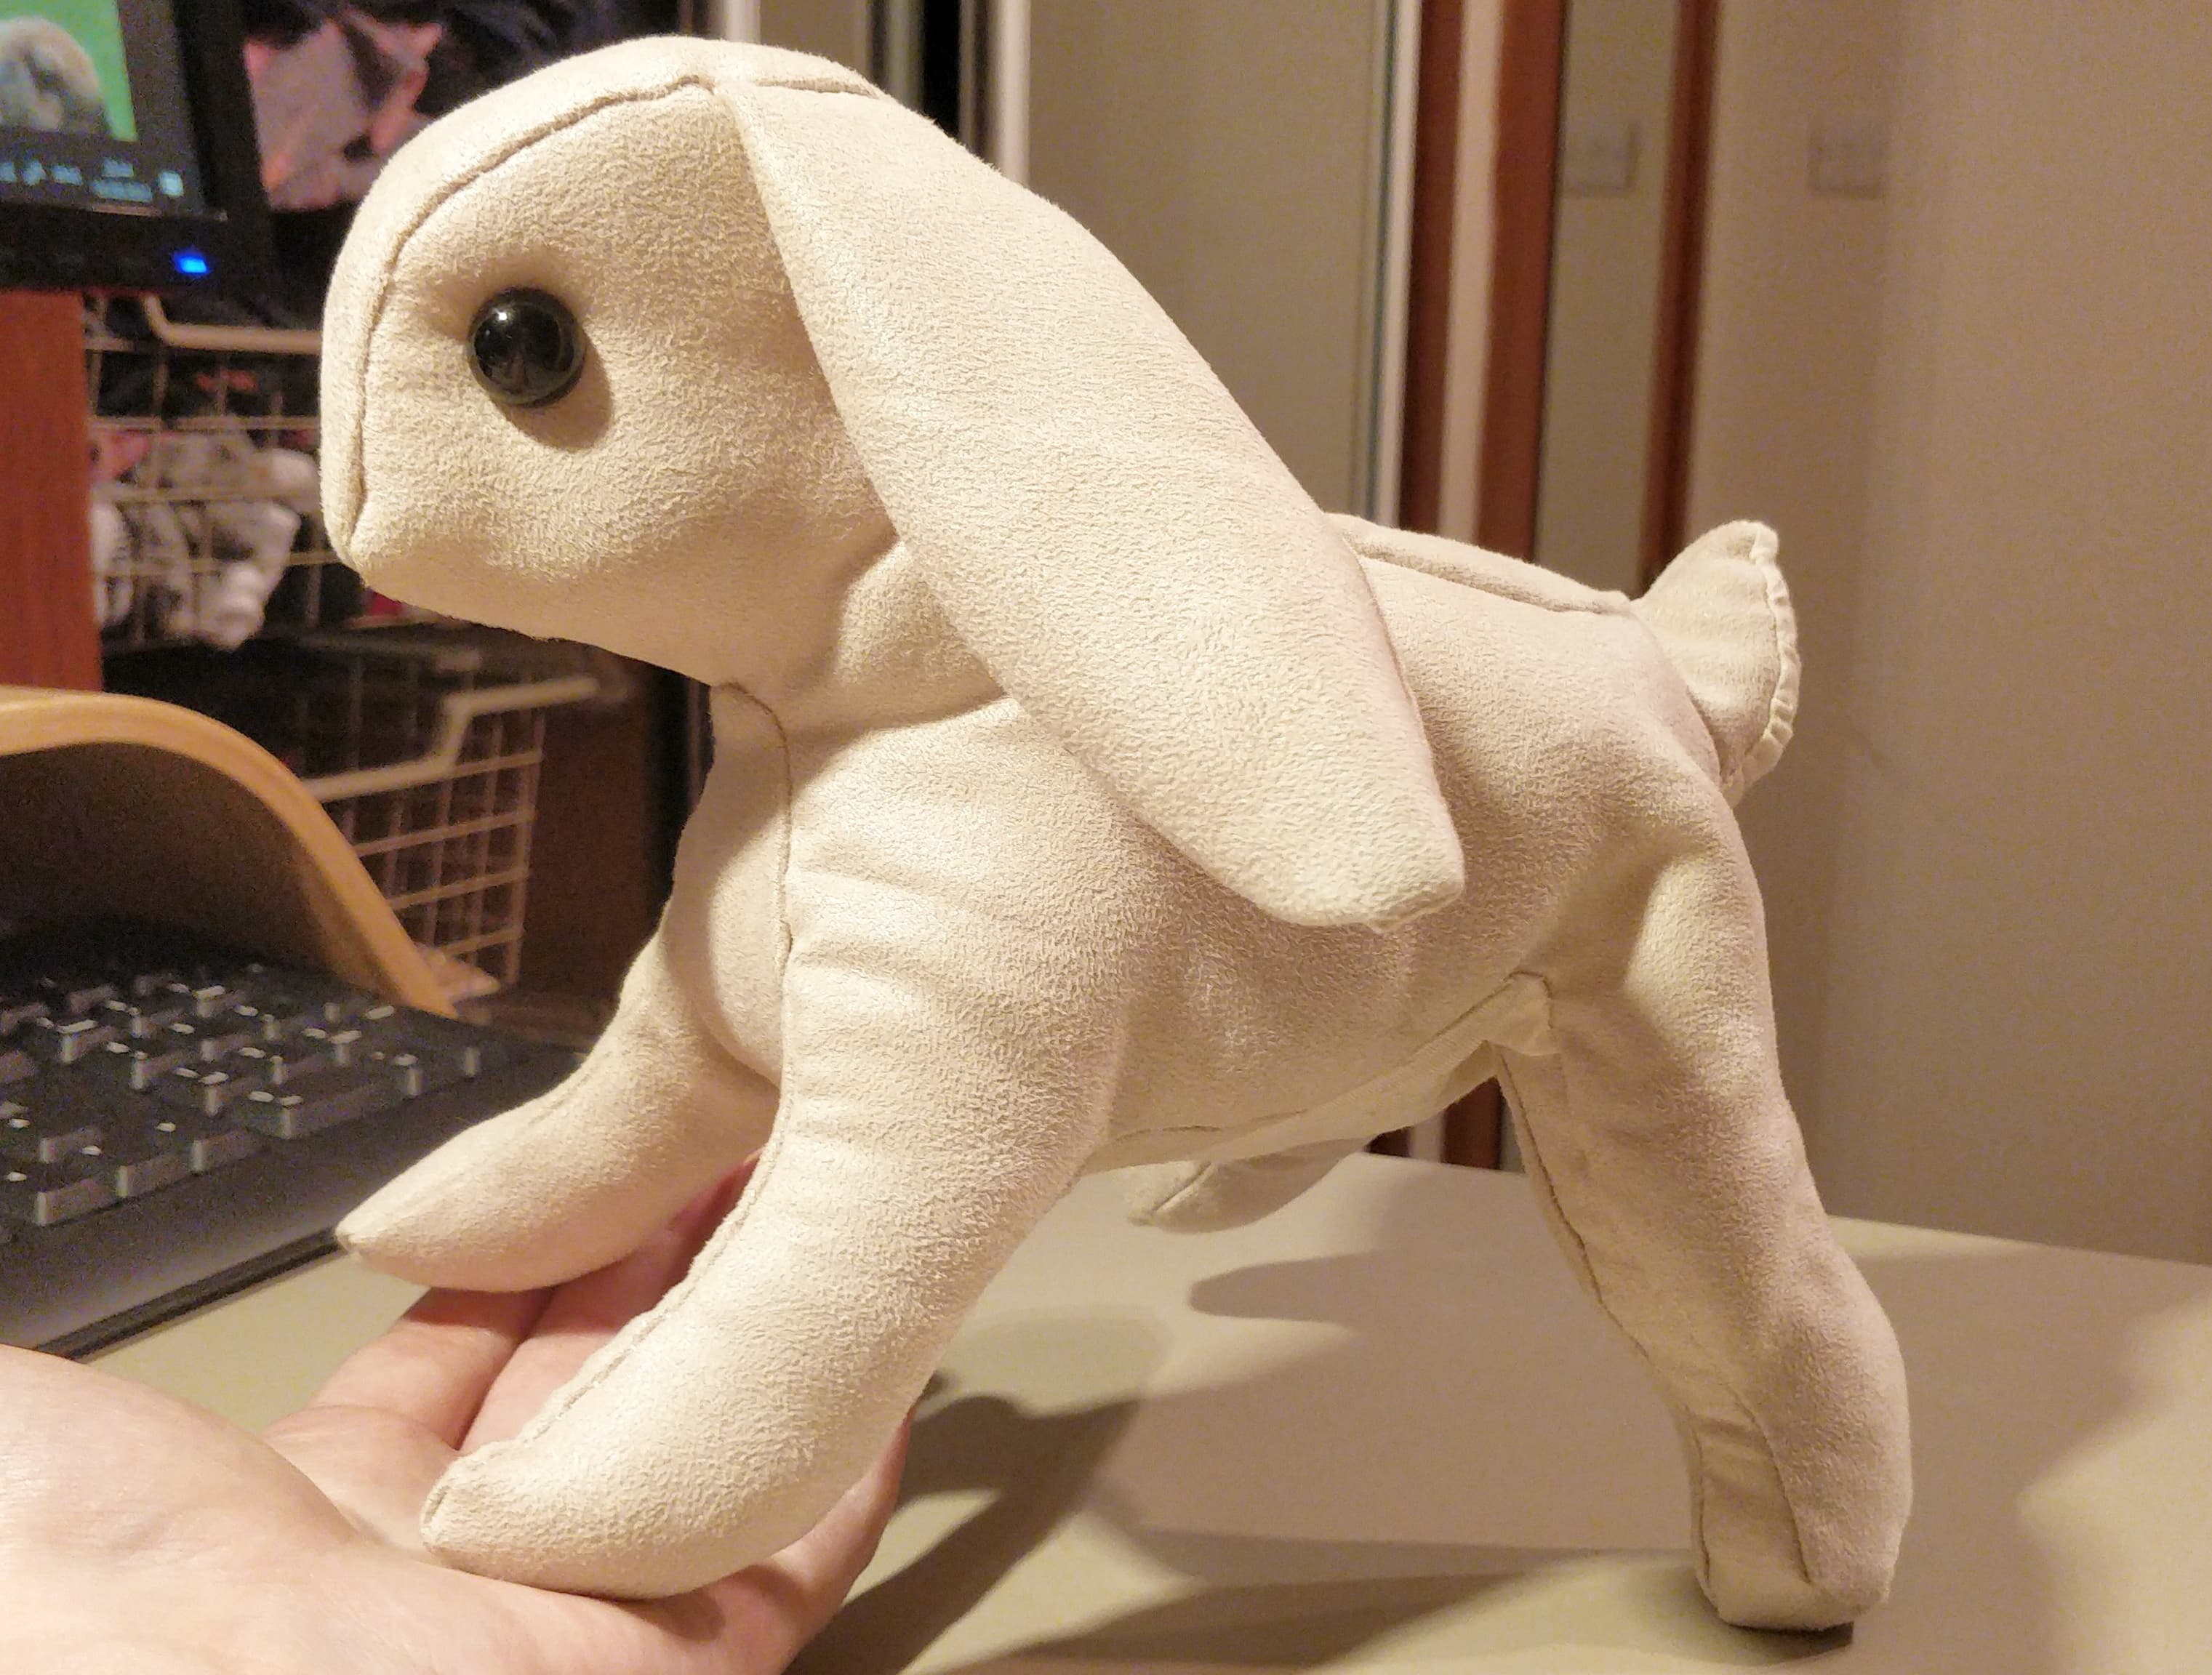 The stuffed rabbit before the black wool details were added.